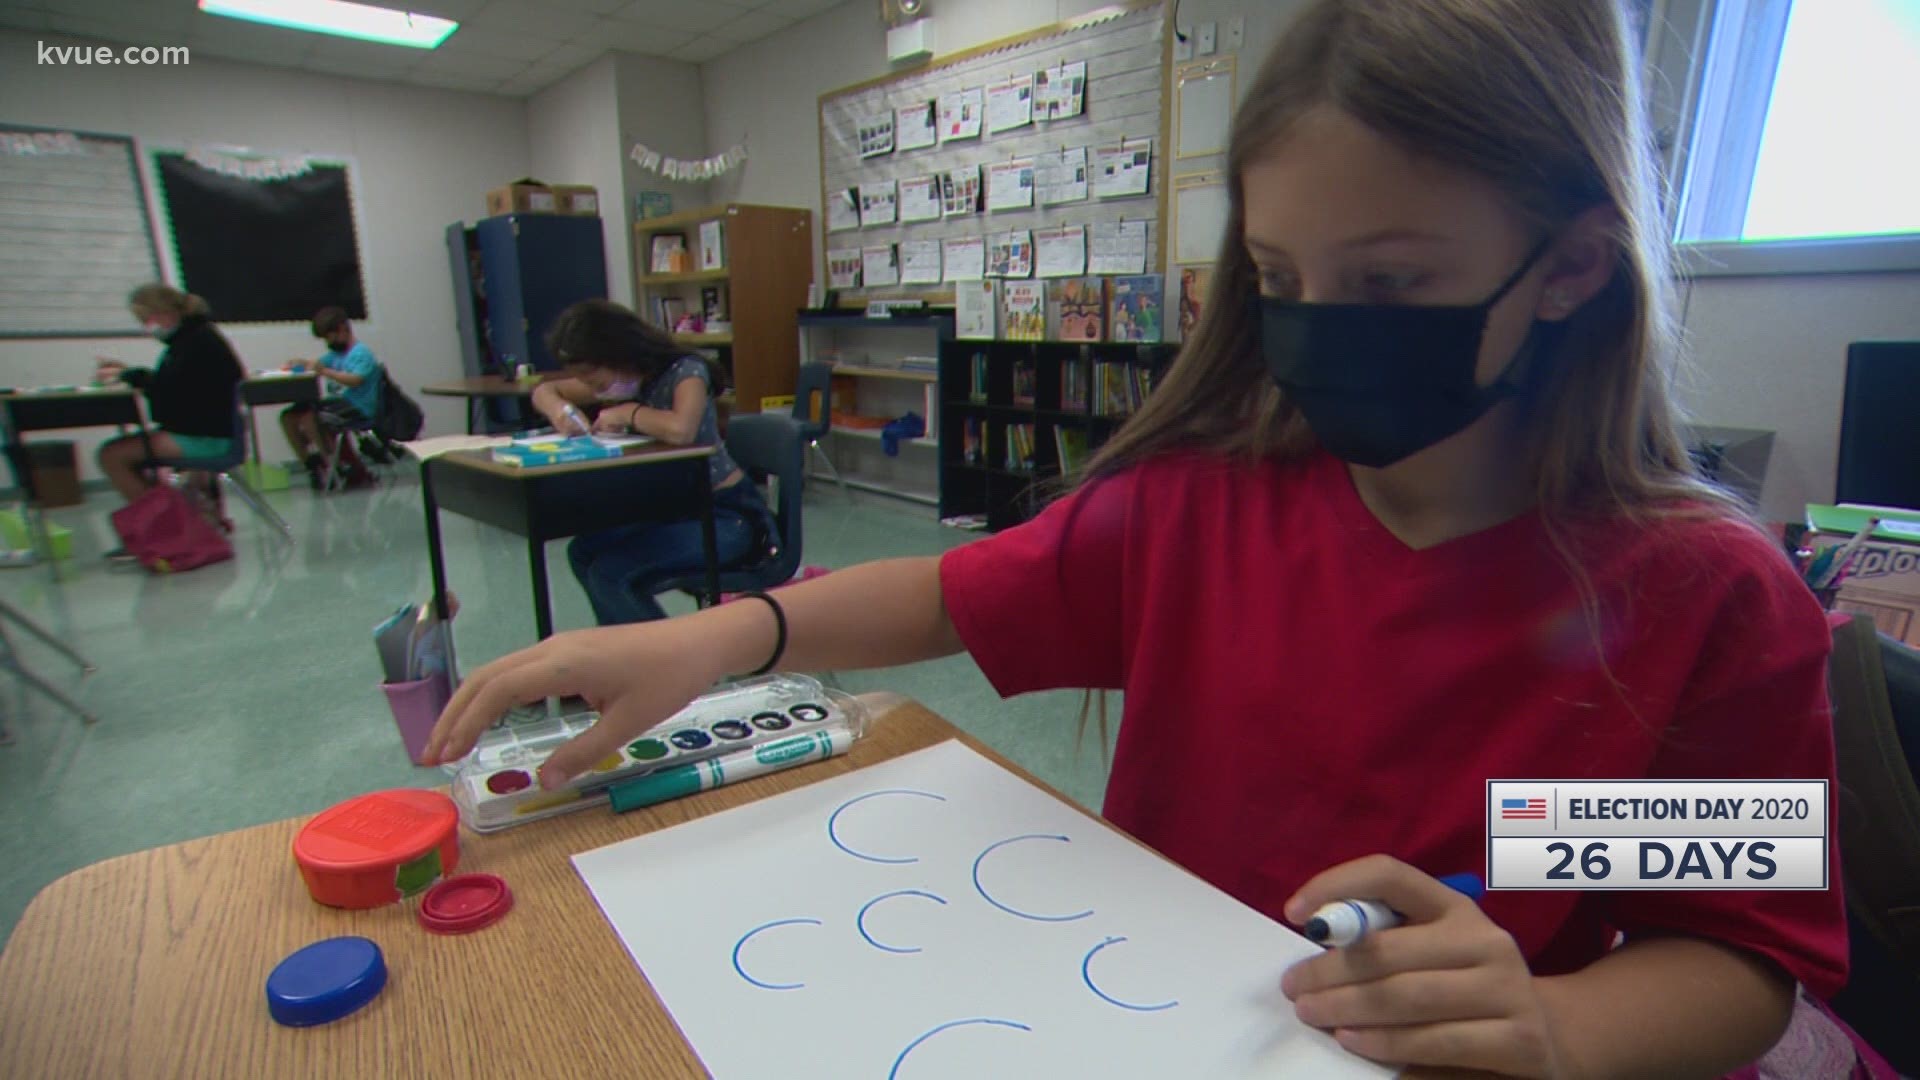 Because of COVID-19 students aren't able to share art supplies like they normally would. So, Lockhart ISD teachers are making sure everyone has the needed supplies.